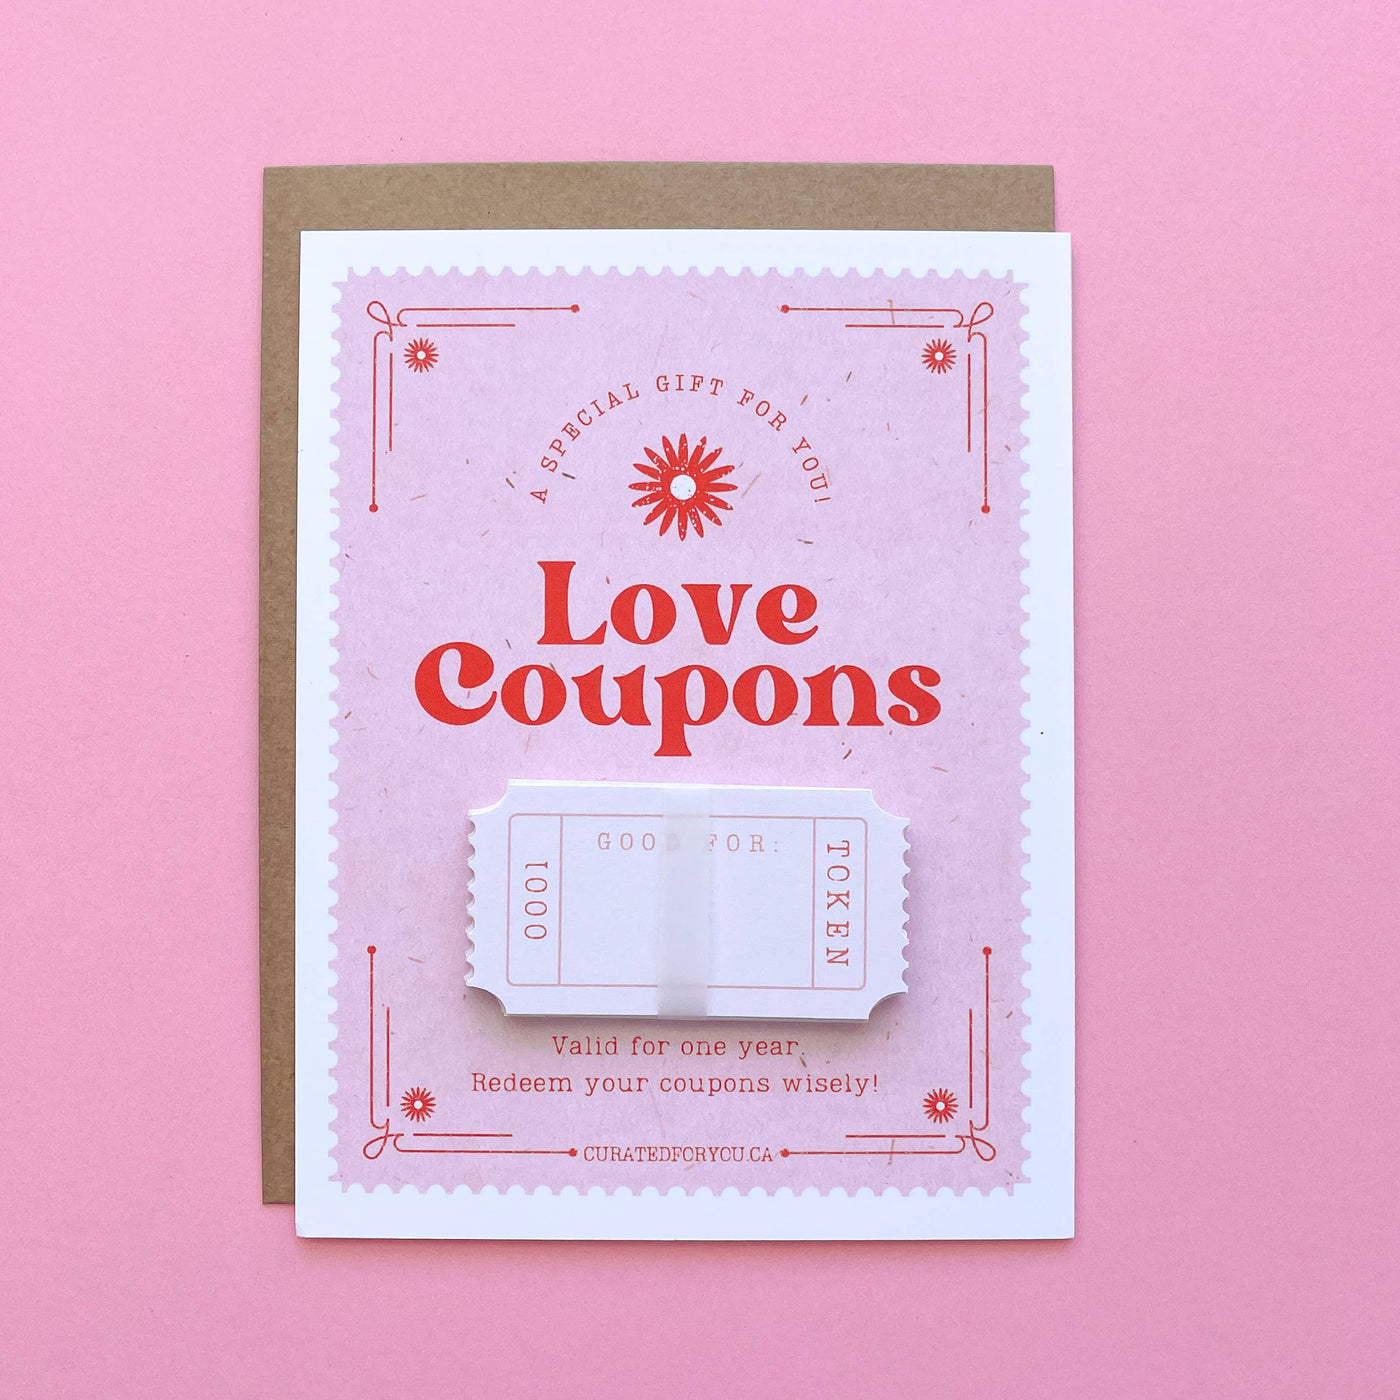 Retro Love Coupons / Tickets